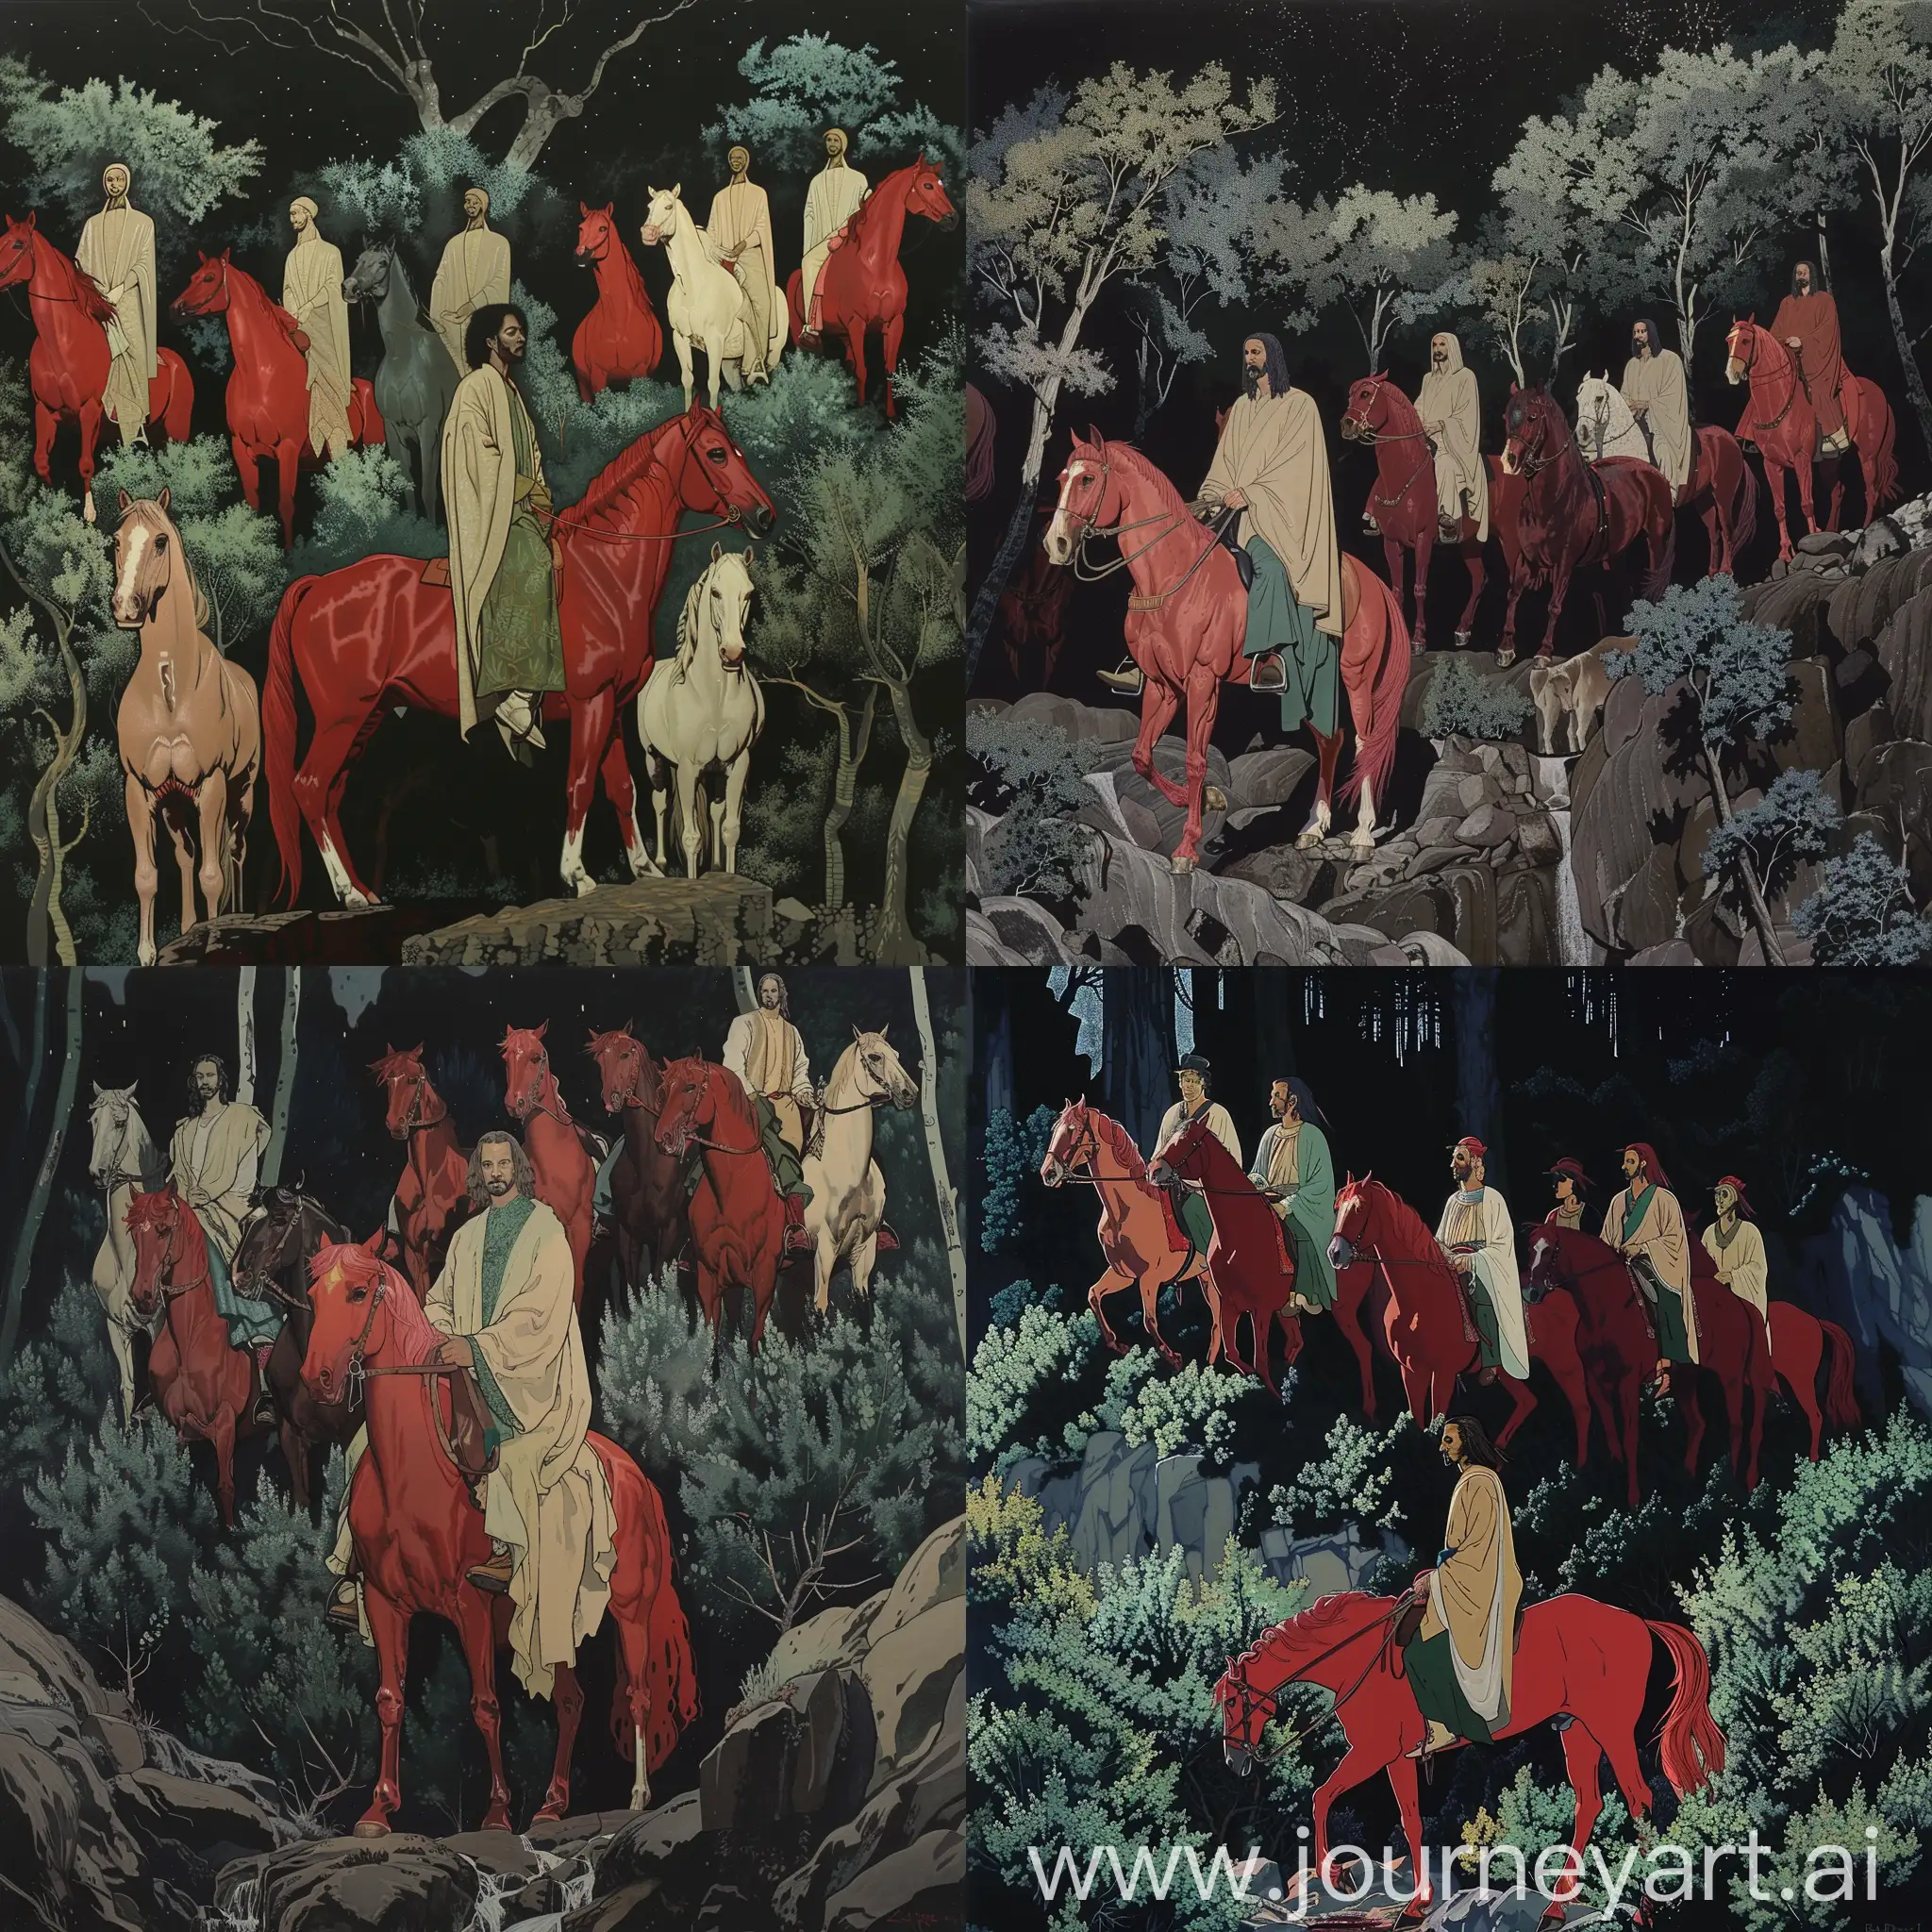 The scene is at night. 
A man is mounted on a red horse. 
He is wearing beige and green robes. 
He is facing the viewer diagonally. 
He is standing among myrtle trees in a ravine.
There are 9 additional mounted horses behind him. There 3 red, 3 sorrel and 3 white horses behind him.
